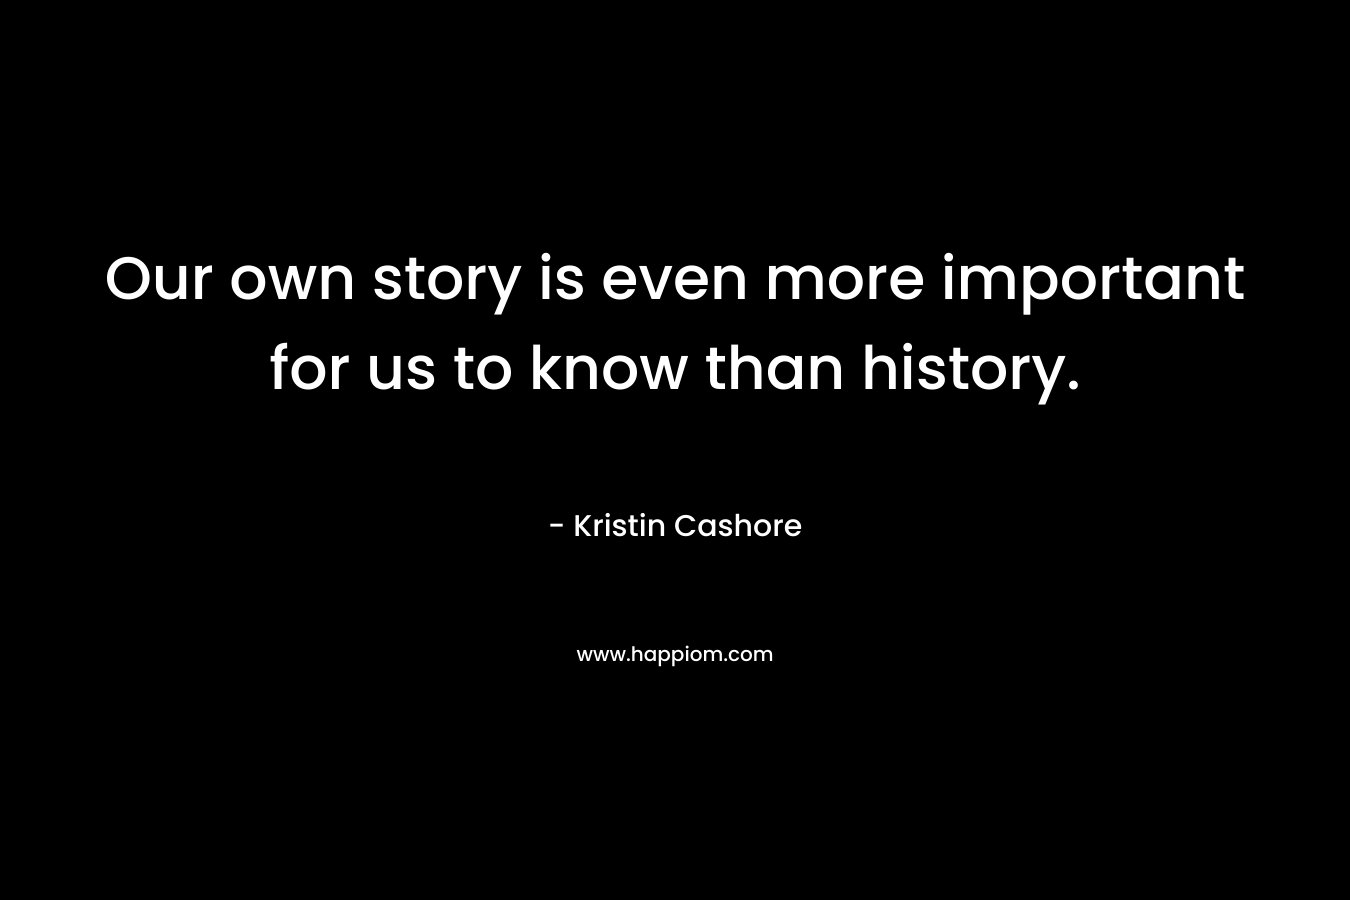 Our own story is even more important for us to know than history.